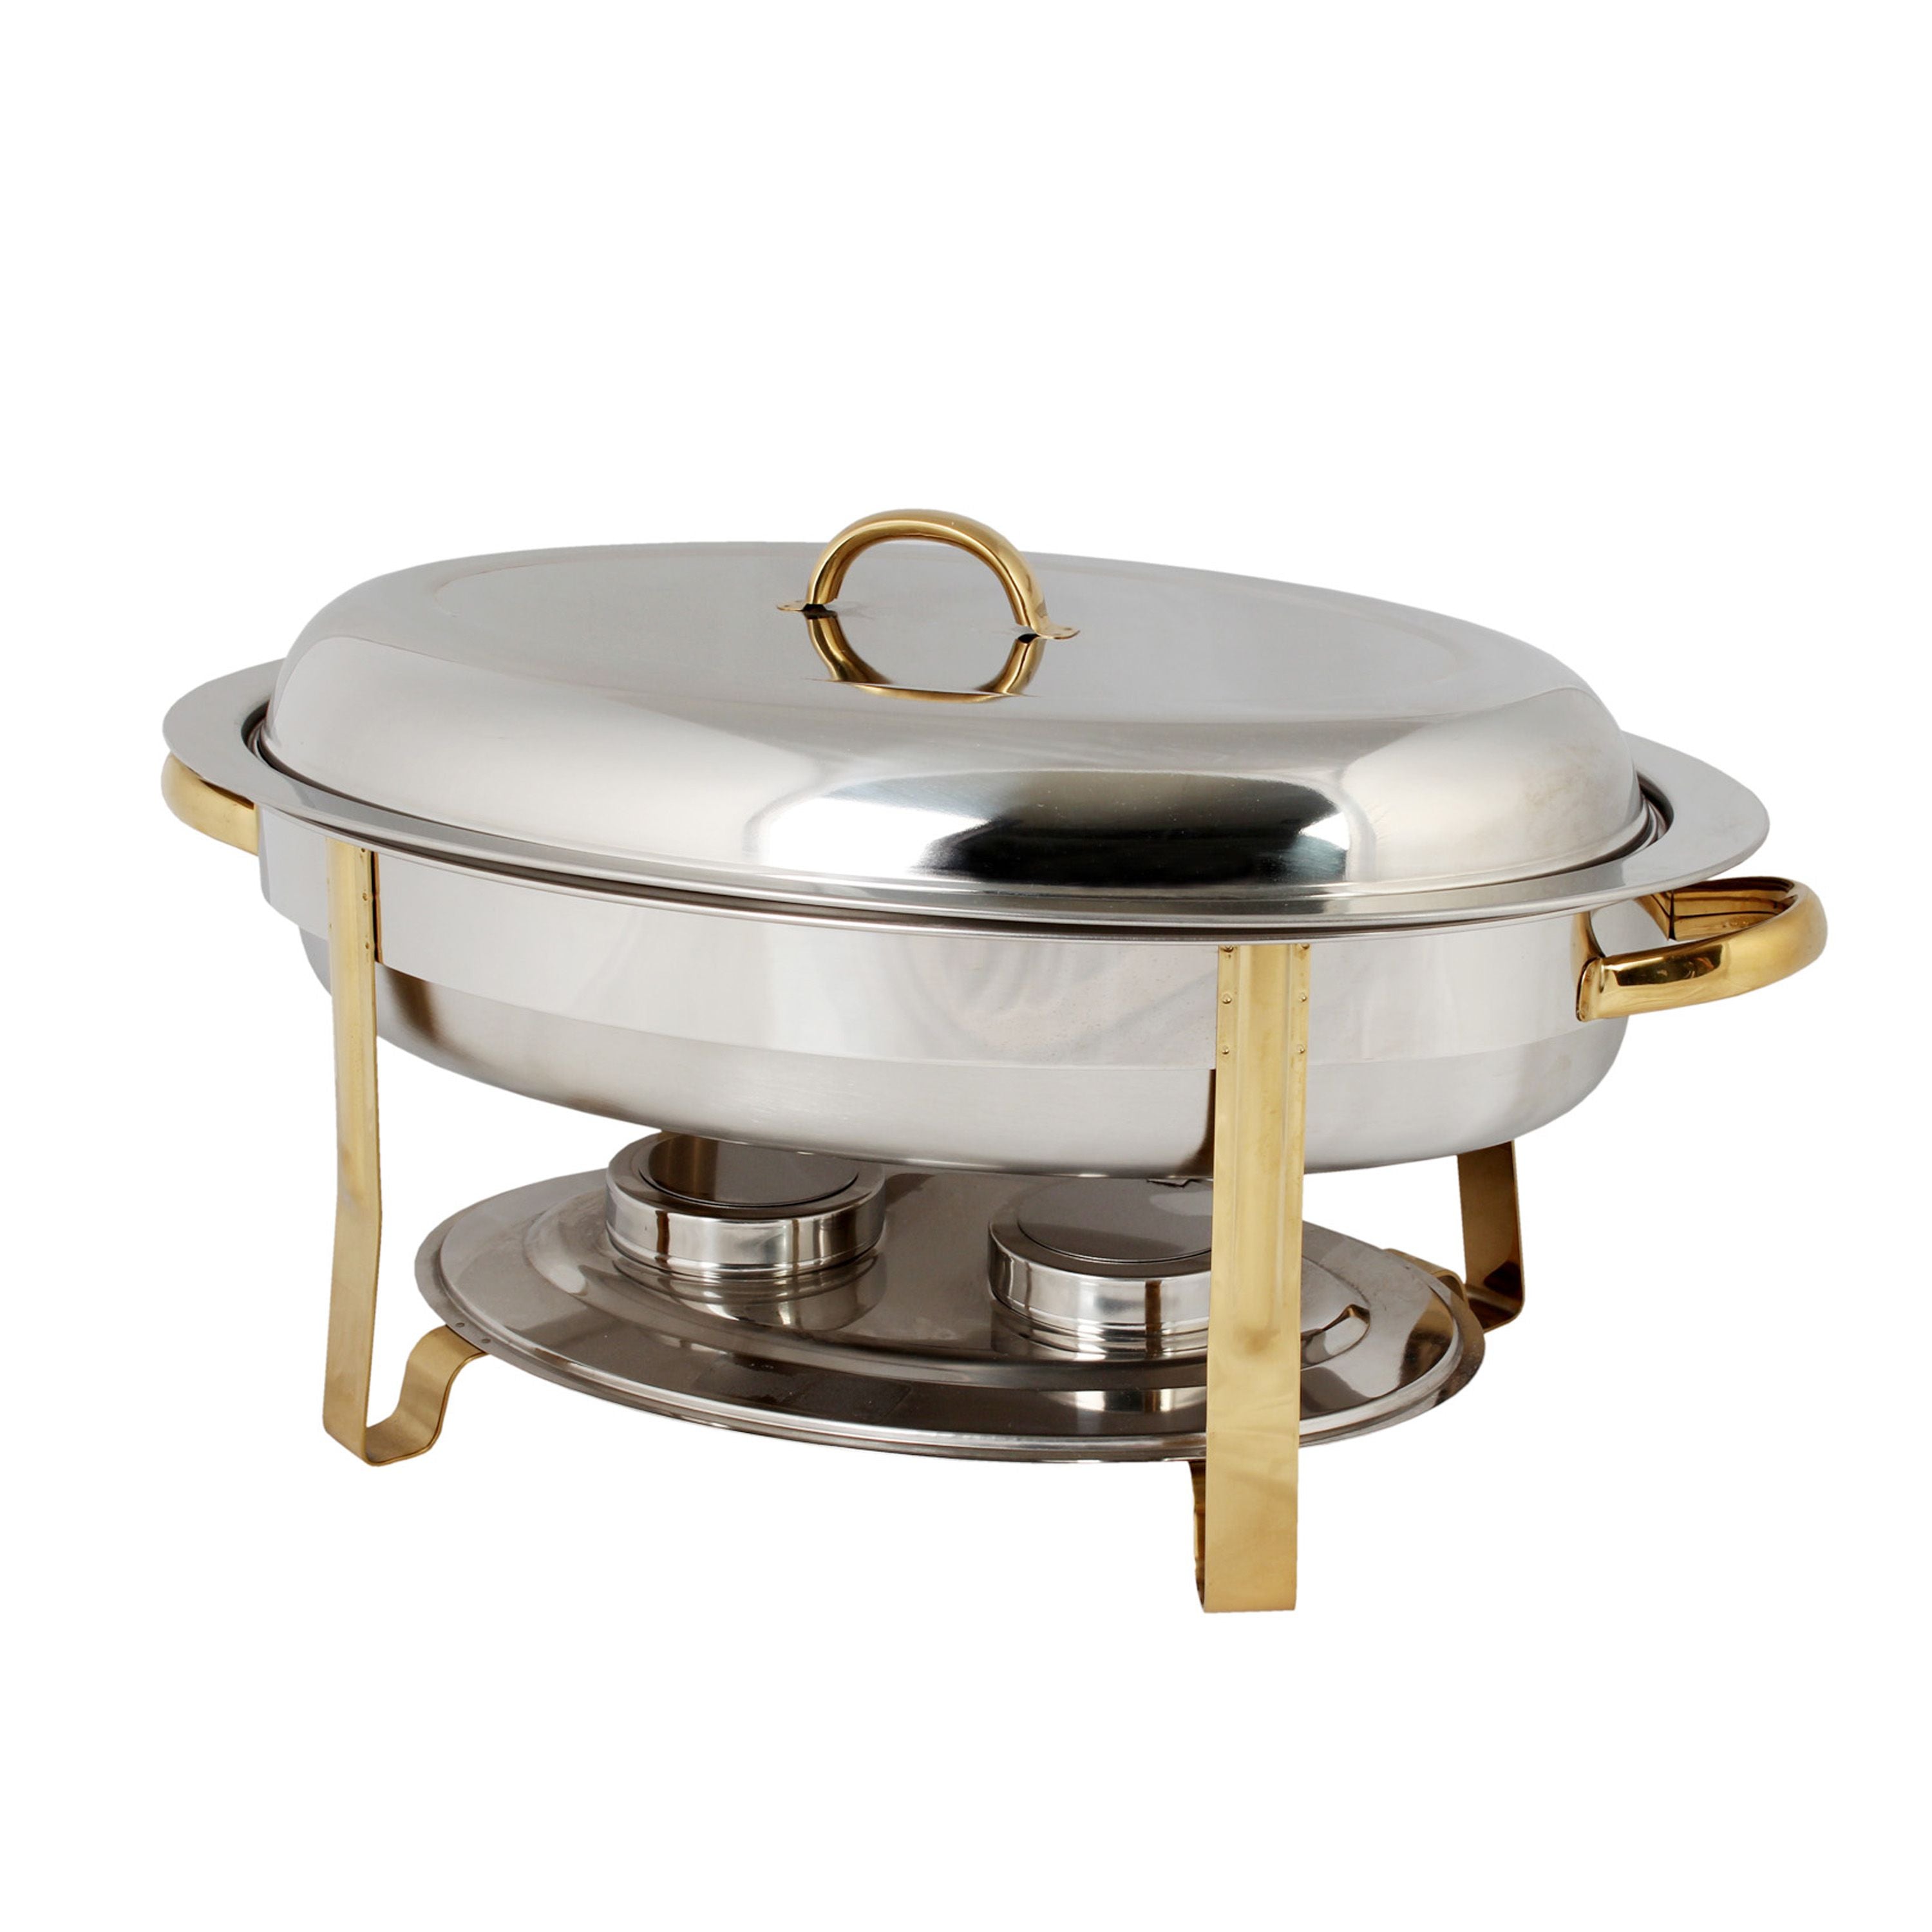 Thunder Group SLRCF0836GH 6-Quart Gold Accented Oval Chafer